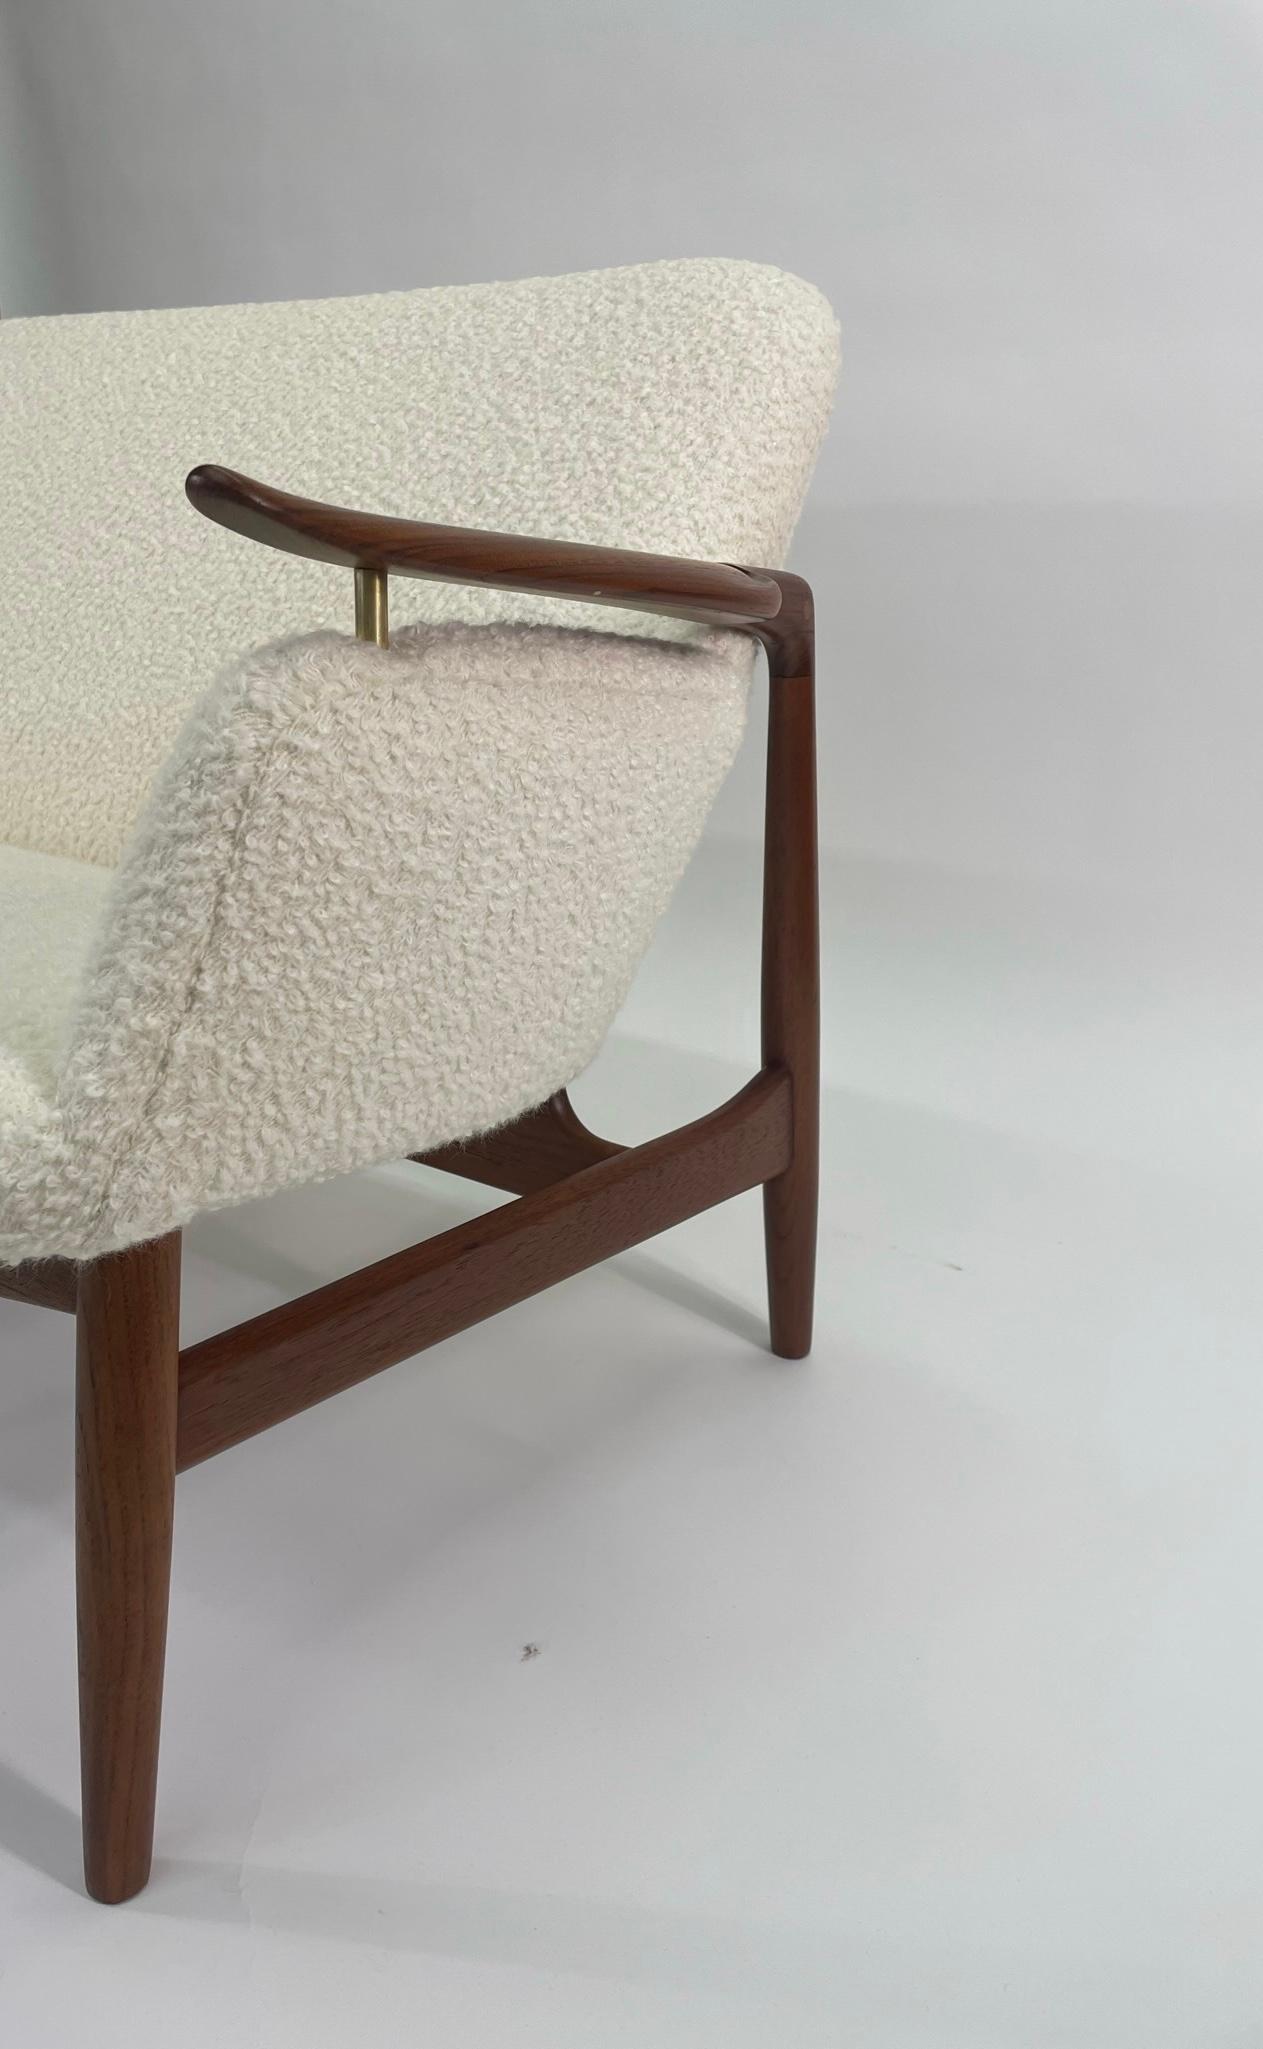 Finn Juhl NV-53  Settee by Niels Vodder, Circa 1950's In Excellent Condition For Sale In San Diego, CA